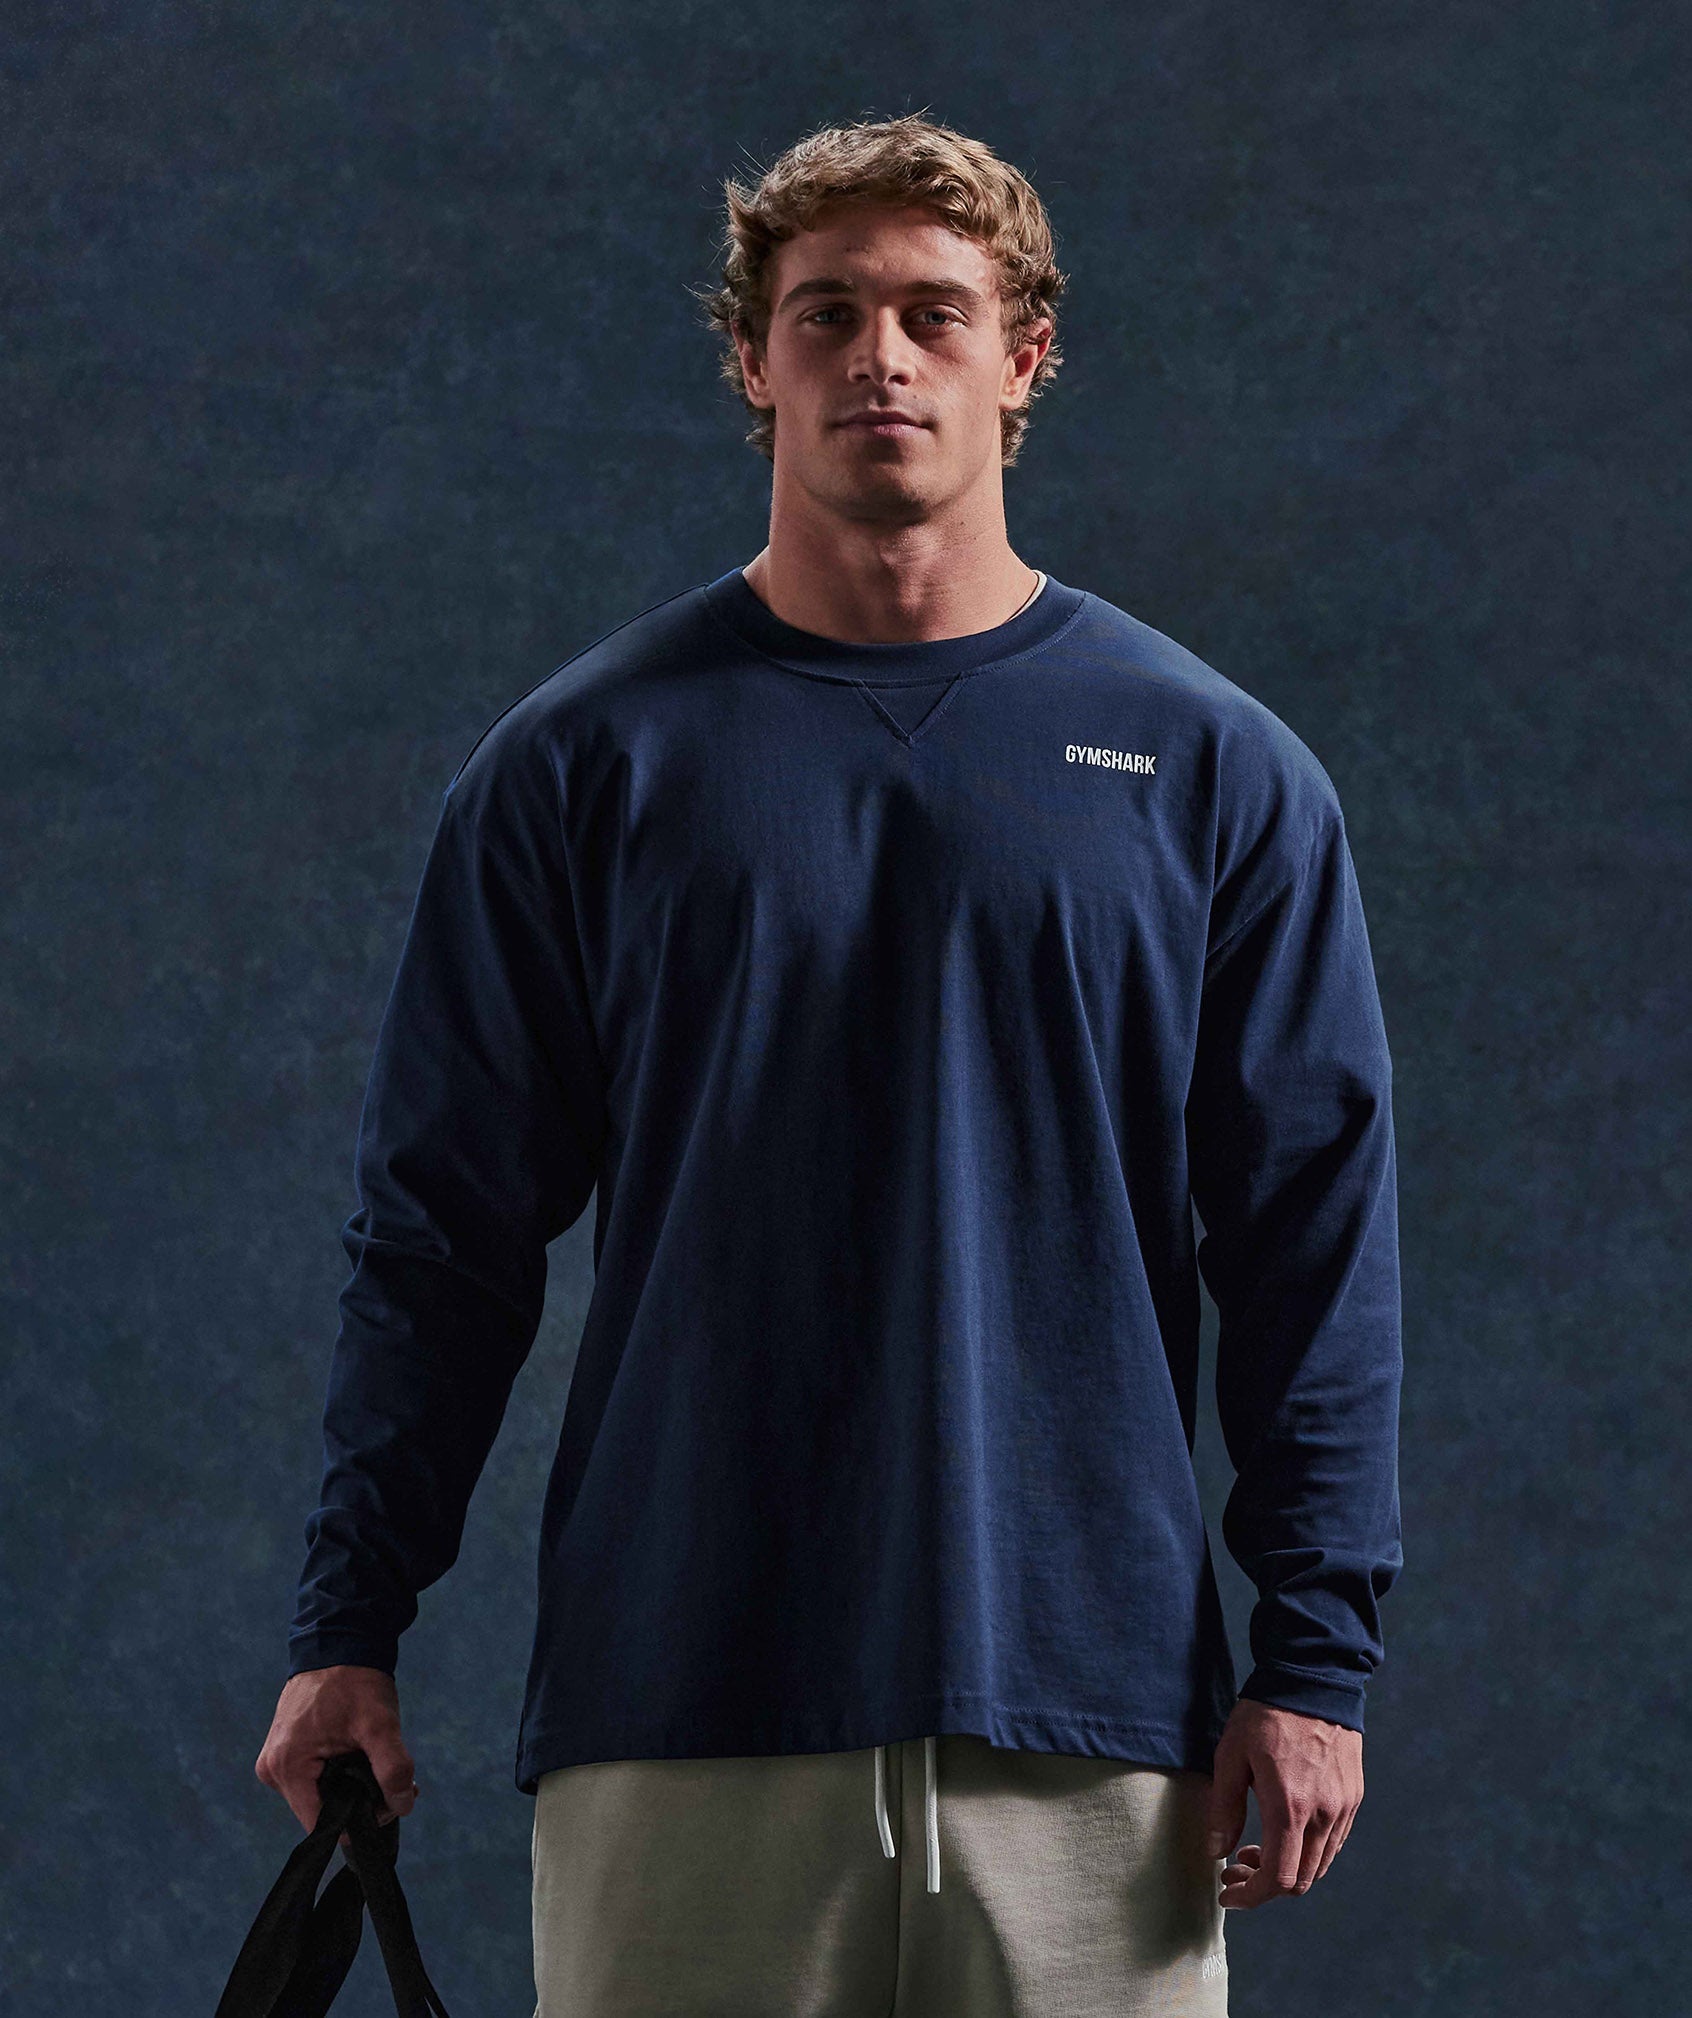 Rest Day Sweats Long Sleeve T-Shirt in Navy - view 1